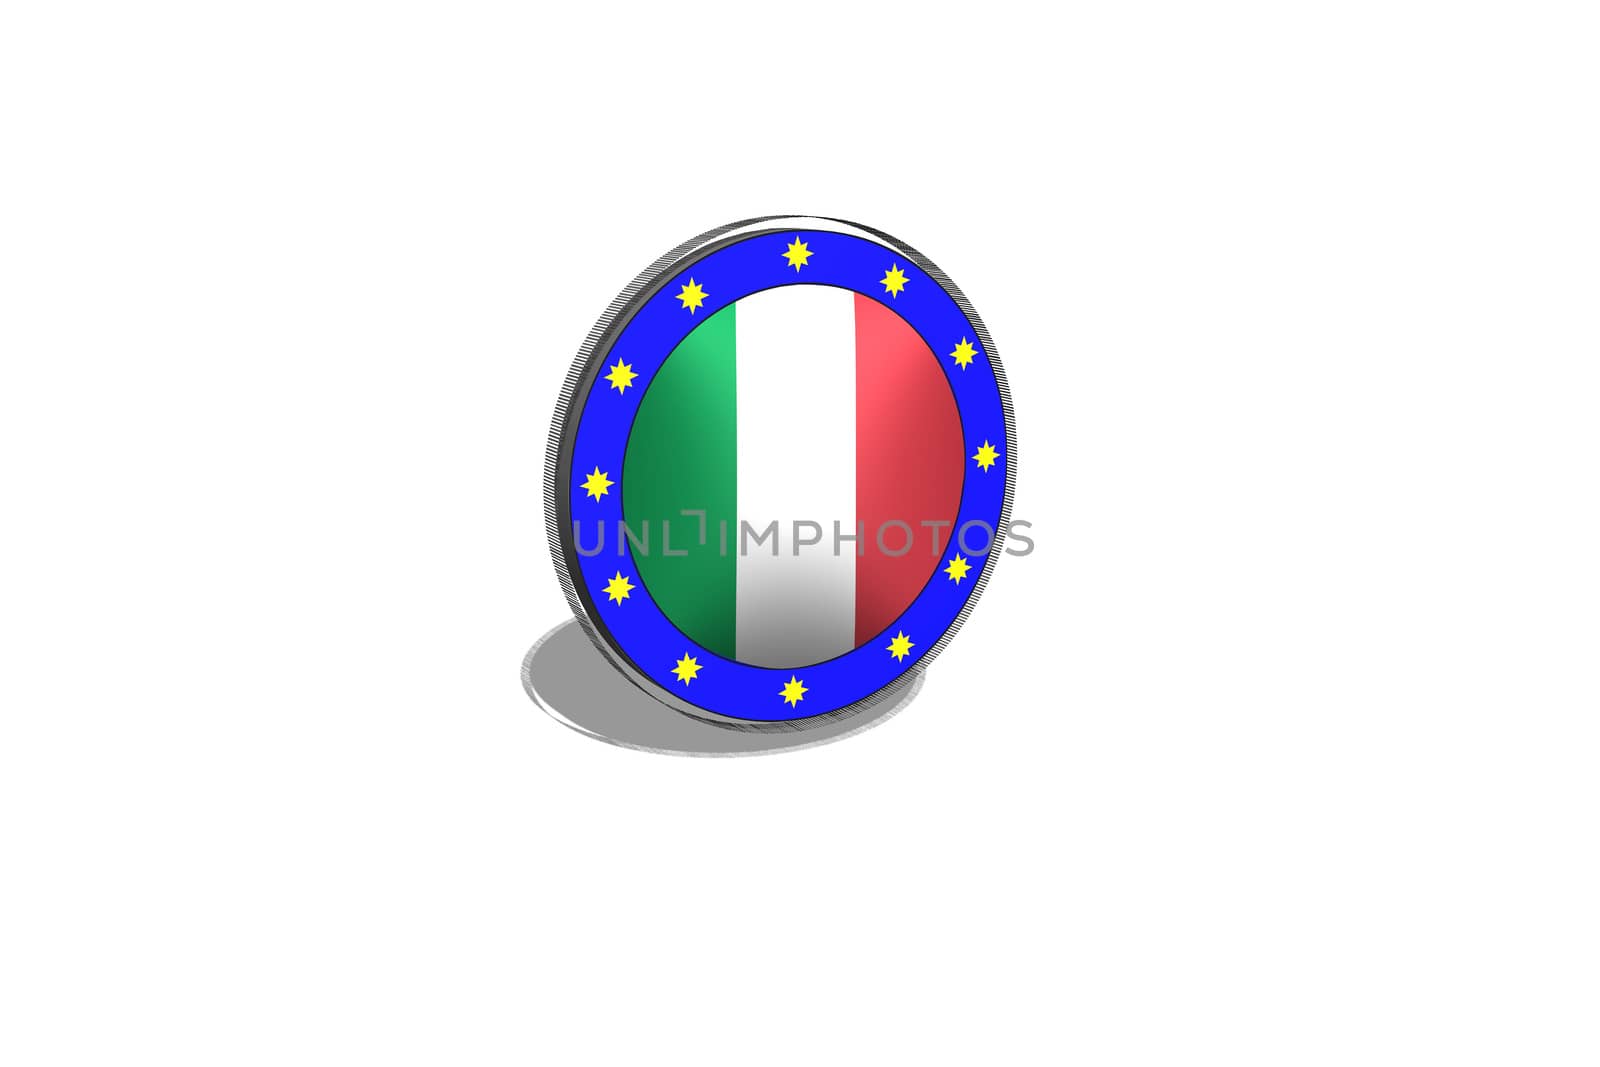 EU button on a button with Italian flag. 3D image - Illustration.